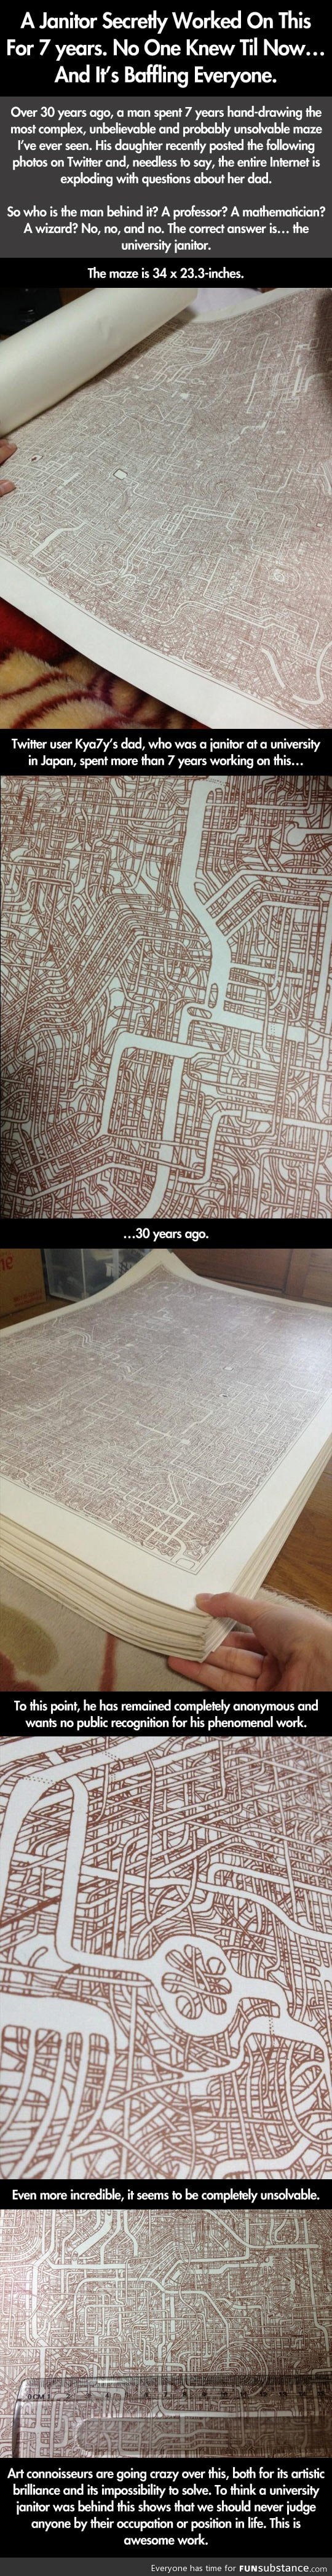 University janitor draws an impossible maze